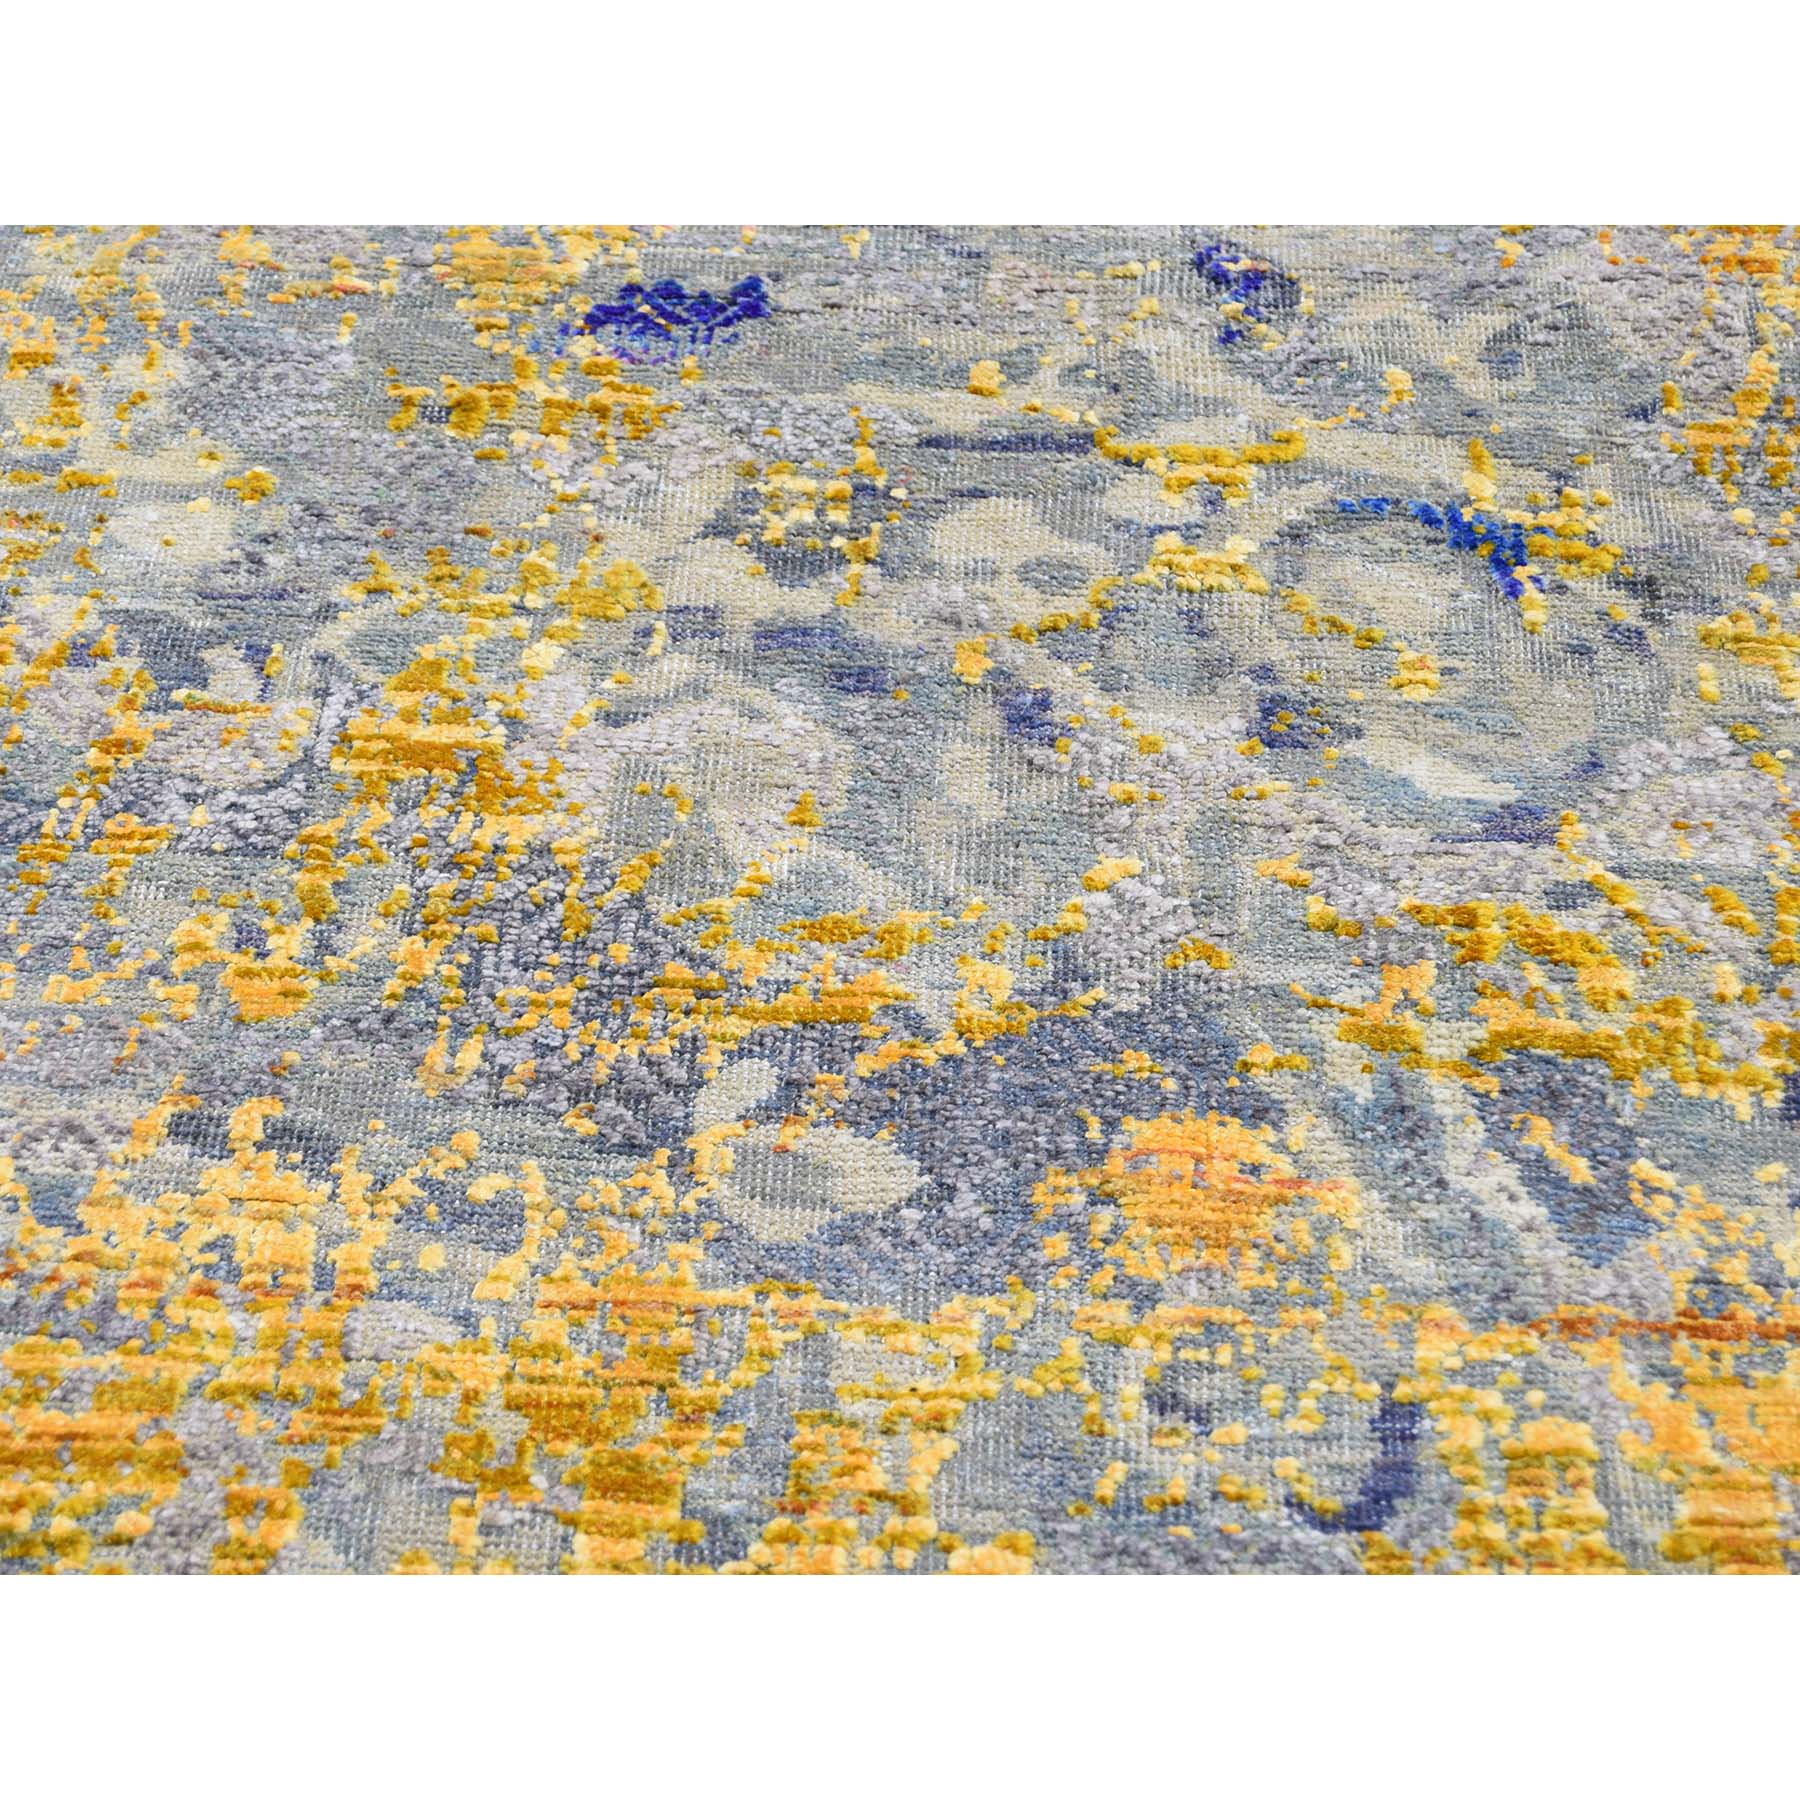 8-10 x12-5  Sari Silk With Textured Wool Yellow & Navy Blue hand-Knotted Oriental Rug 